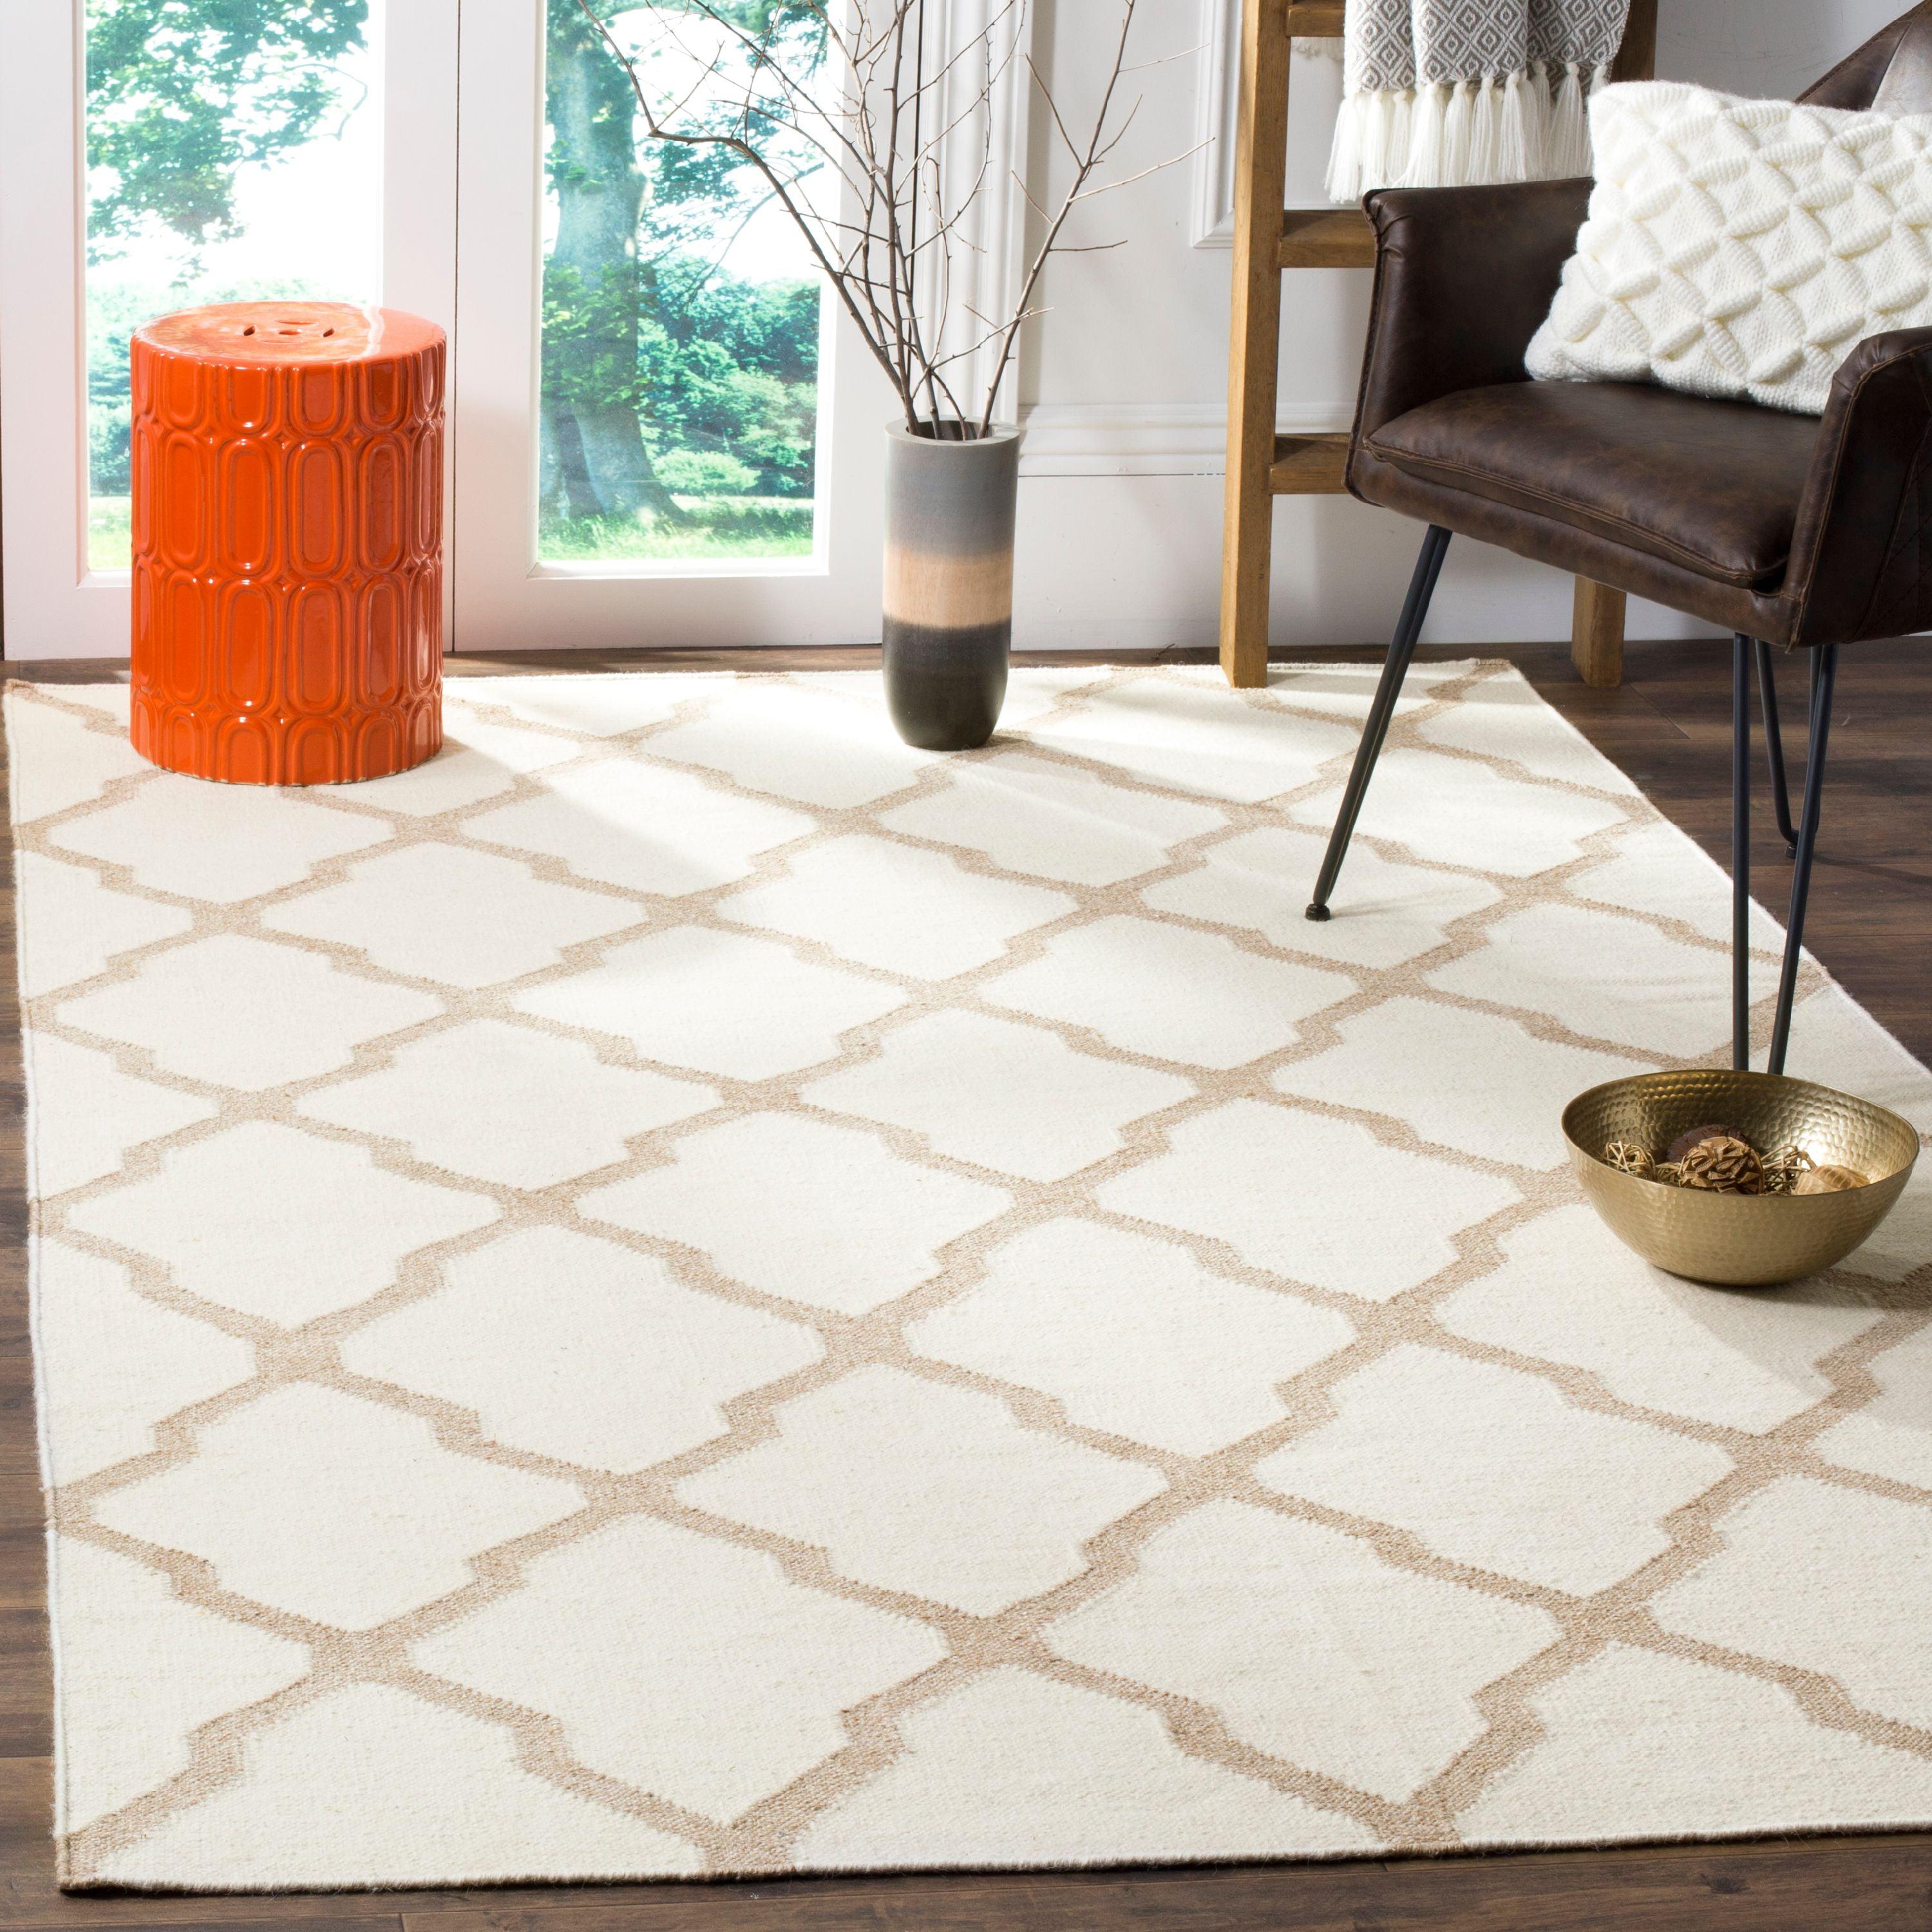 Handwoven Ivory Camel Square Wool & Viscose Rug 6'x6'